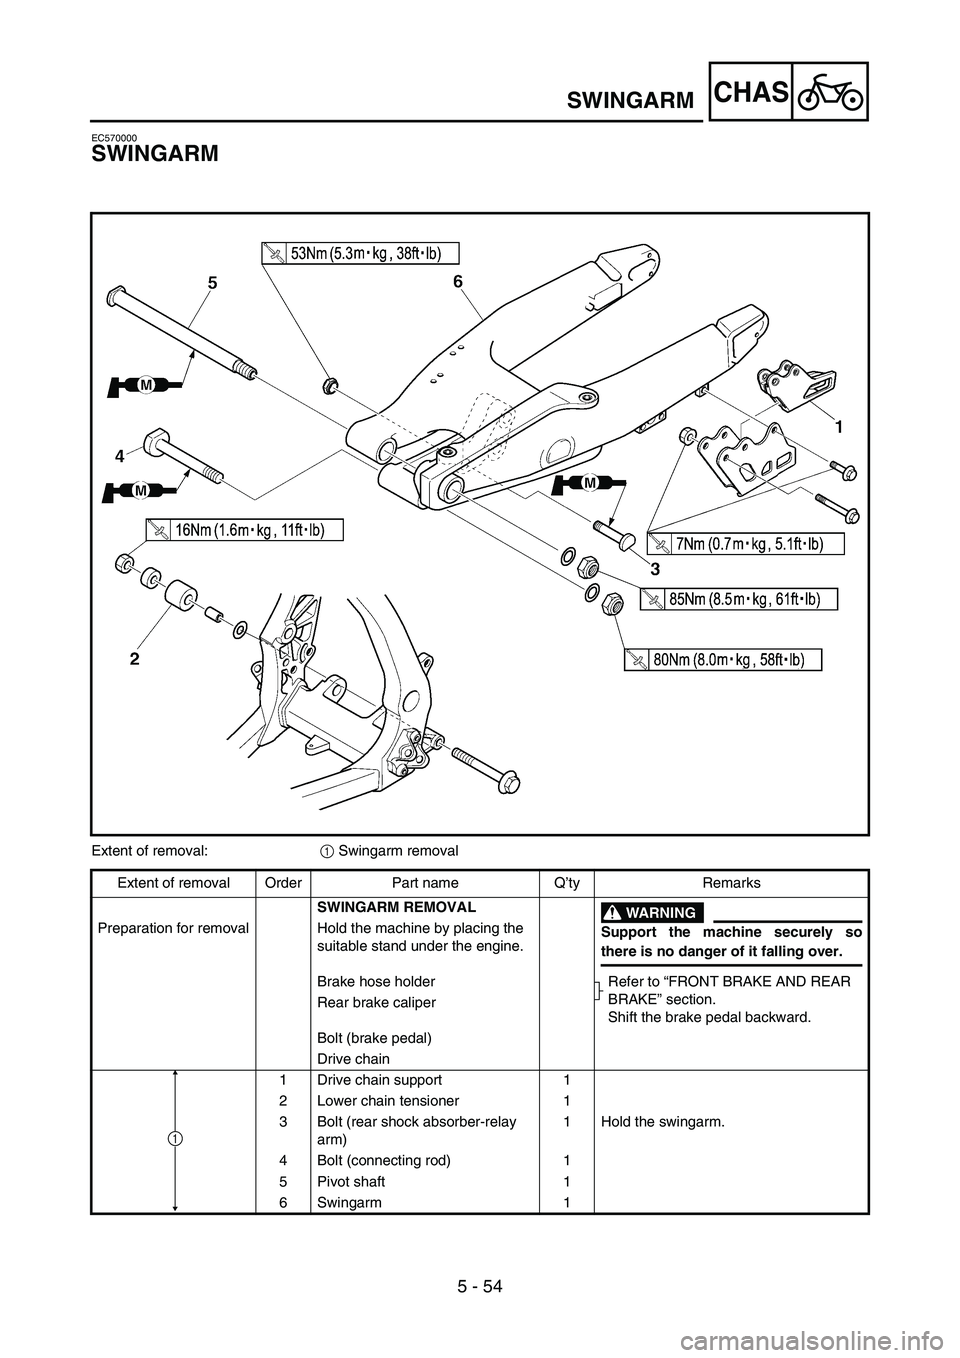 YAMAHA YZ250F 2007 User Guide 5 - 54
CHASSWINGARM
EC570000
SWINGARM
Extent of removal:
1 Swingarm removal
Extent of removal Order Part name Q’ty Remarks
SWINGARM REMOVAL
WARNING
Support the machine securely so
there is no danger